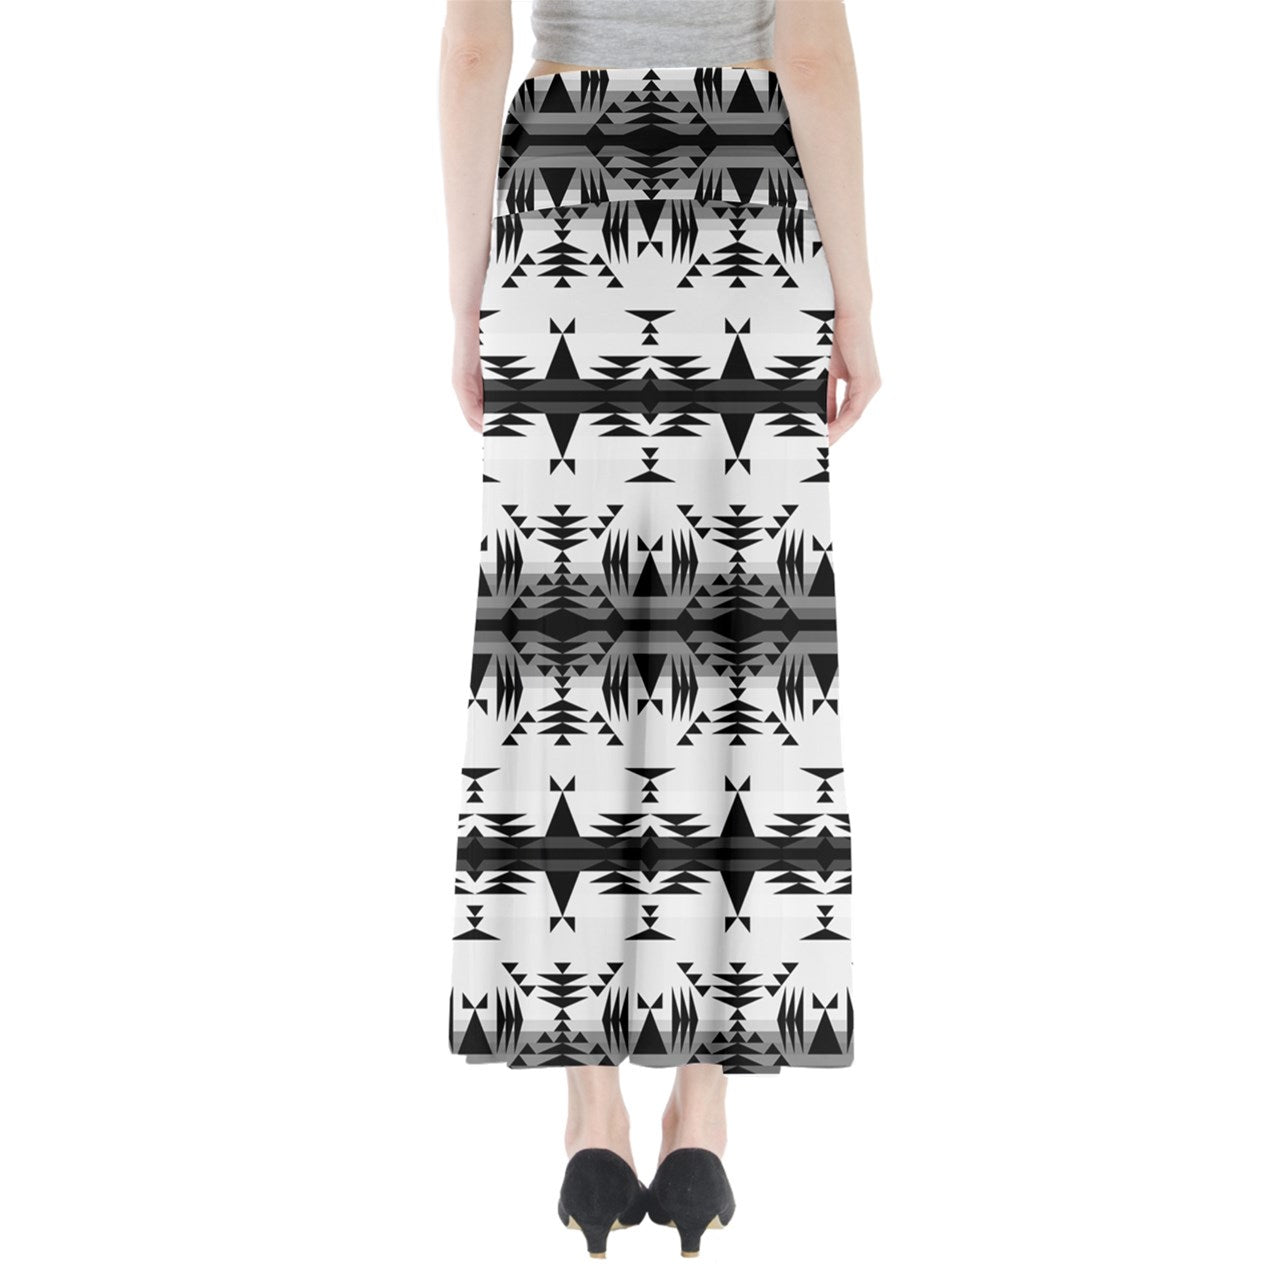 Between the Mountains White and Black Full Length Maxi Skirt